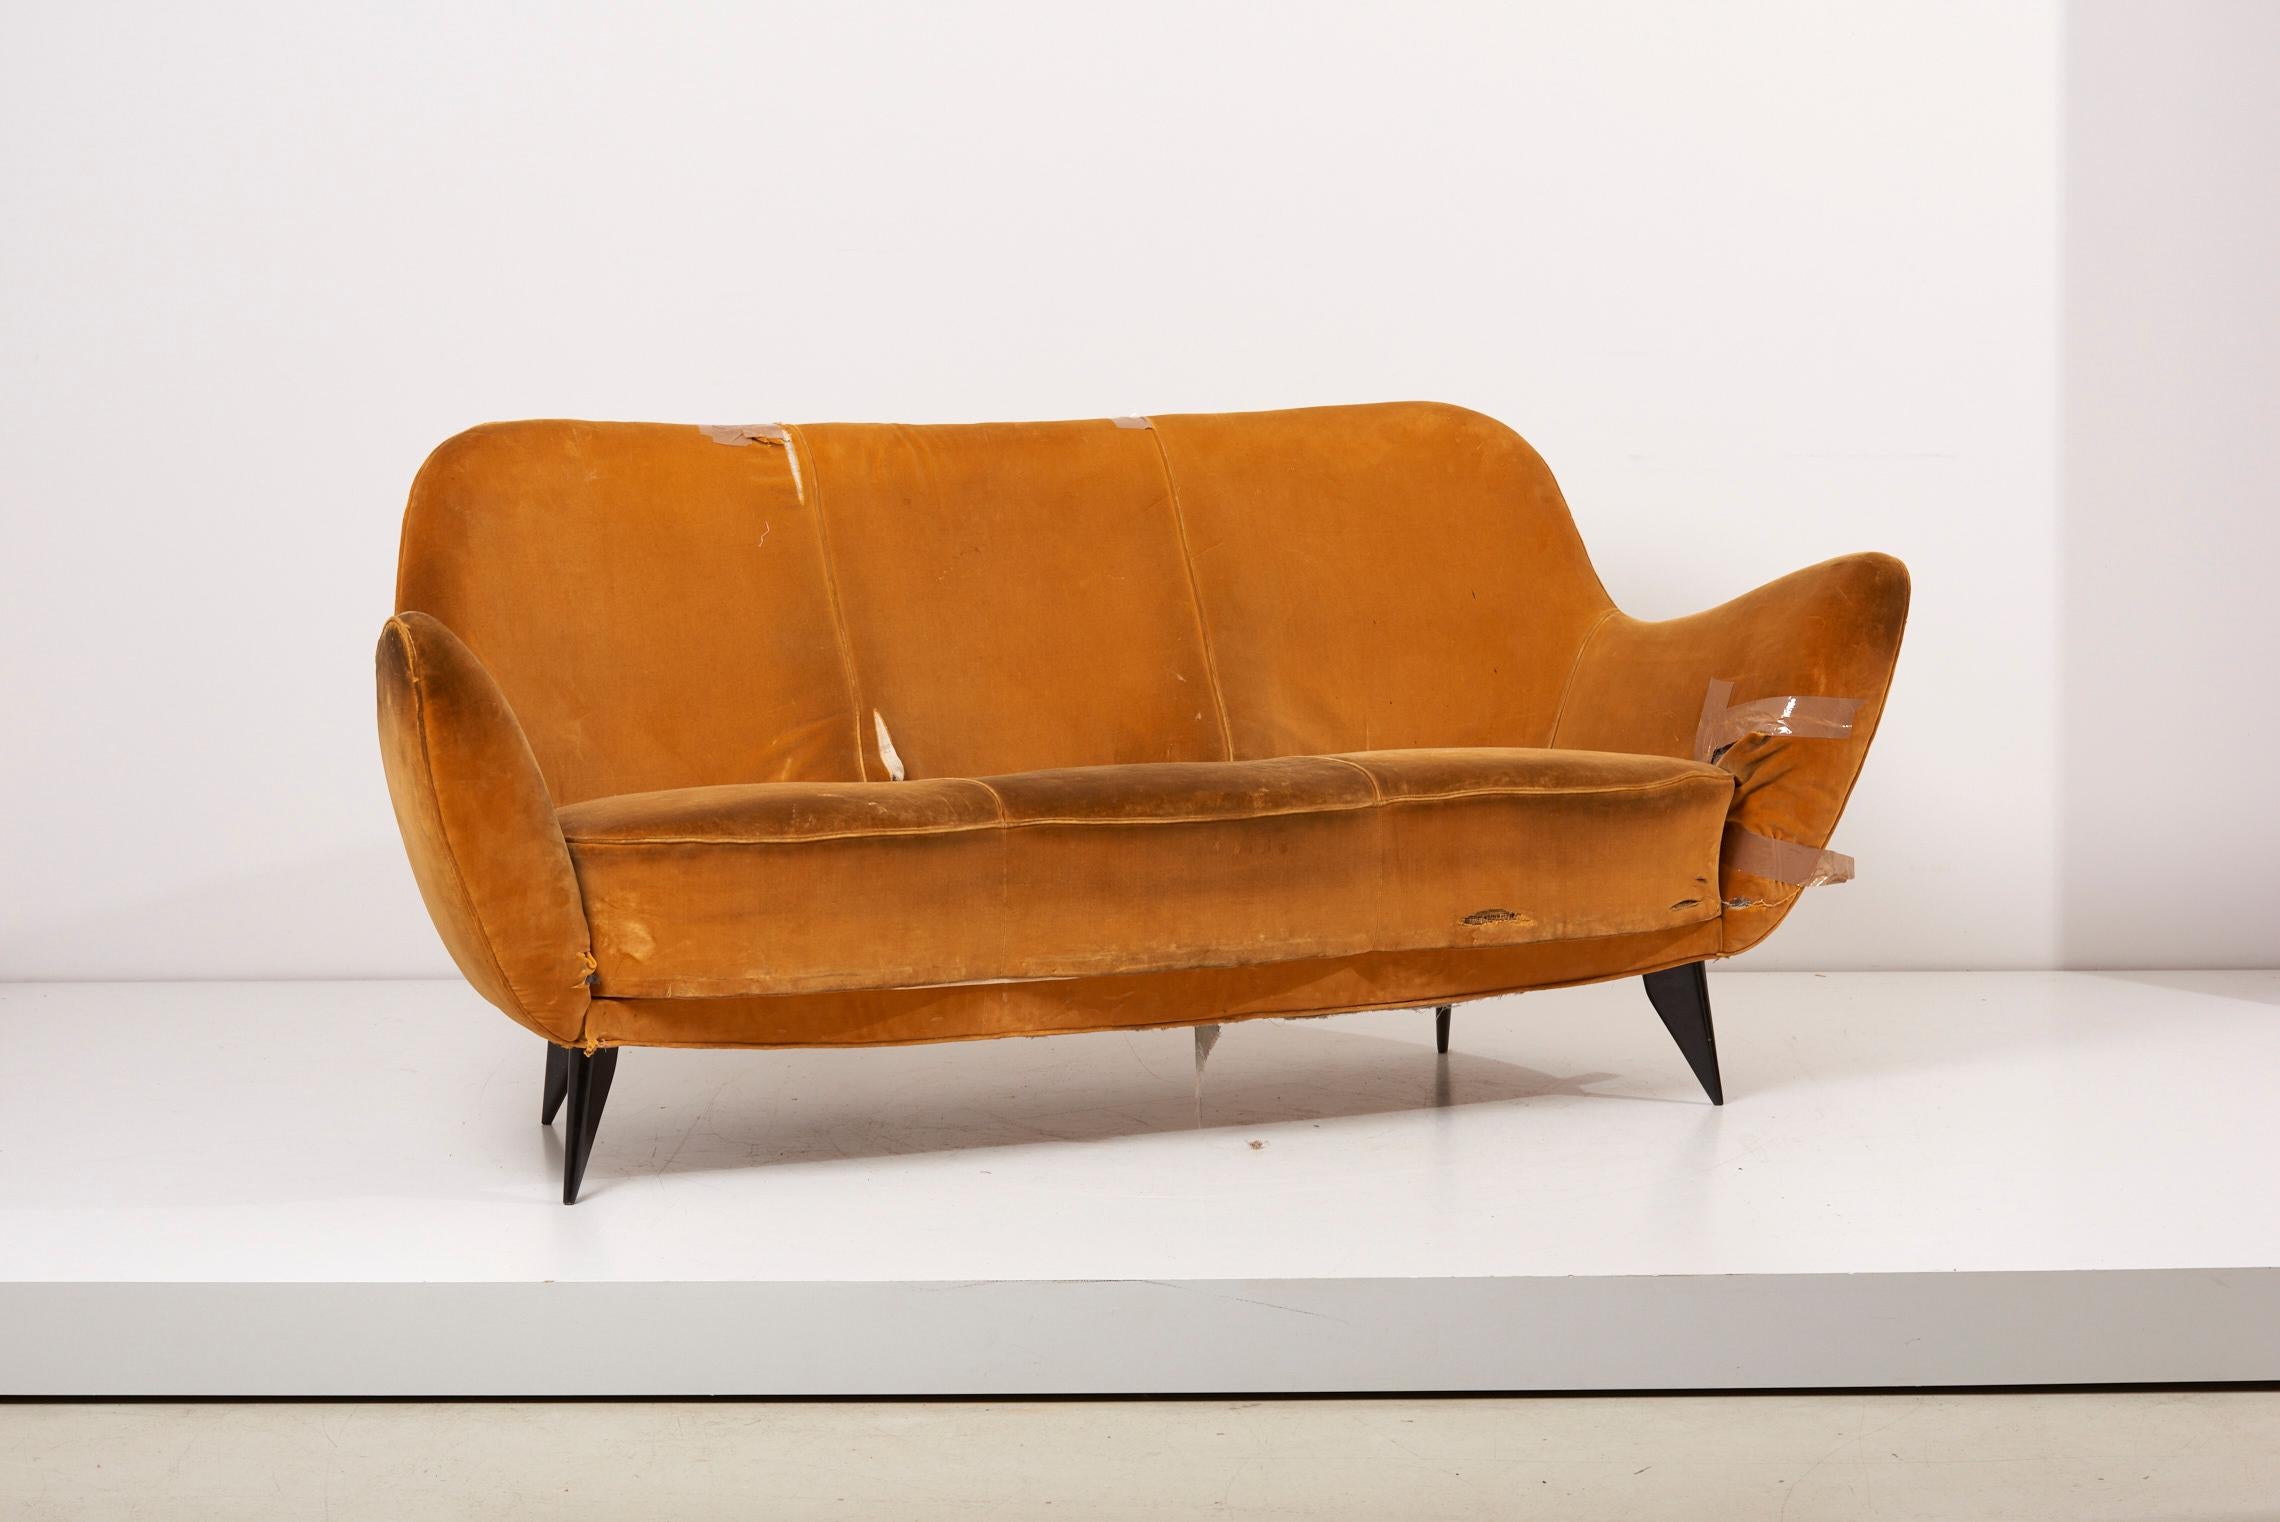 3-seater sofa by Guglielmo Veronesi for ISA Bergamo, 1950s. The sofa is in it's original condition and has a vintage upholstery. We offer reupholstery in our in-house workshop.